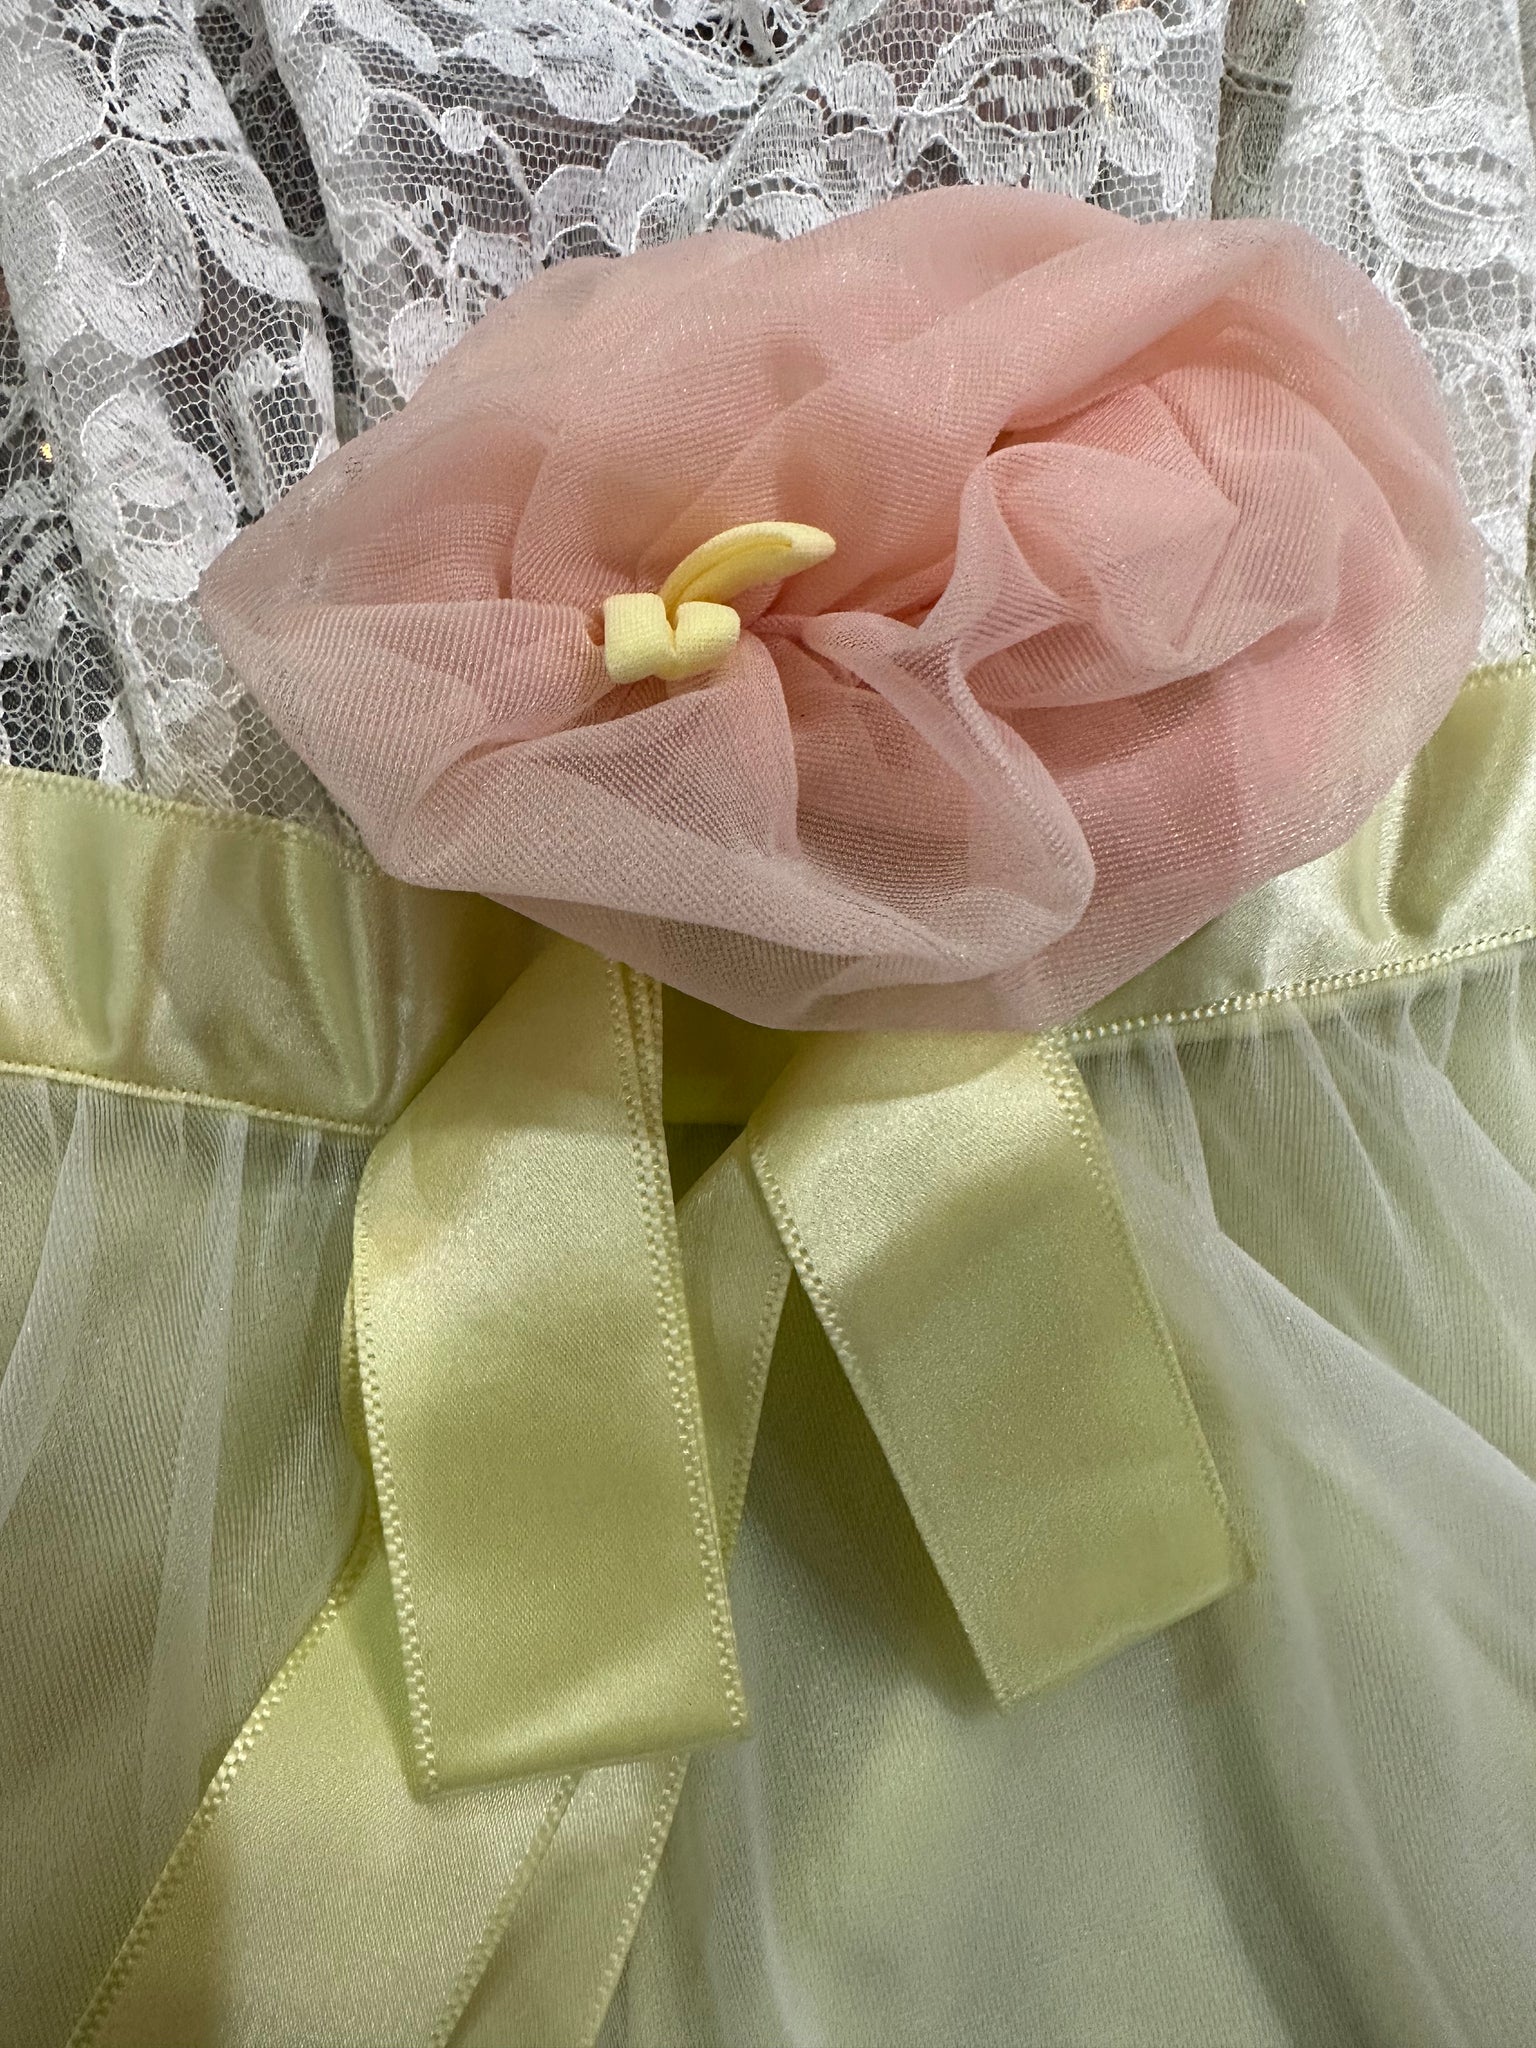 Vanity Fair 60s Chartreuse Nylon Negligee DETAIL  3 of 4